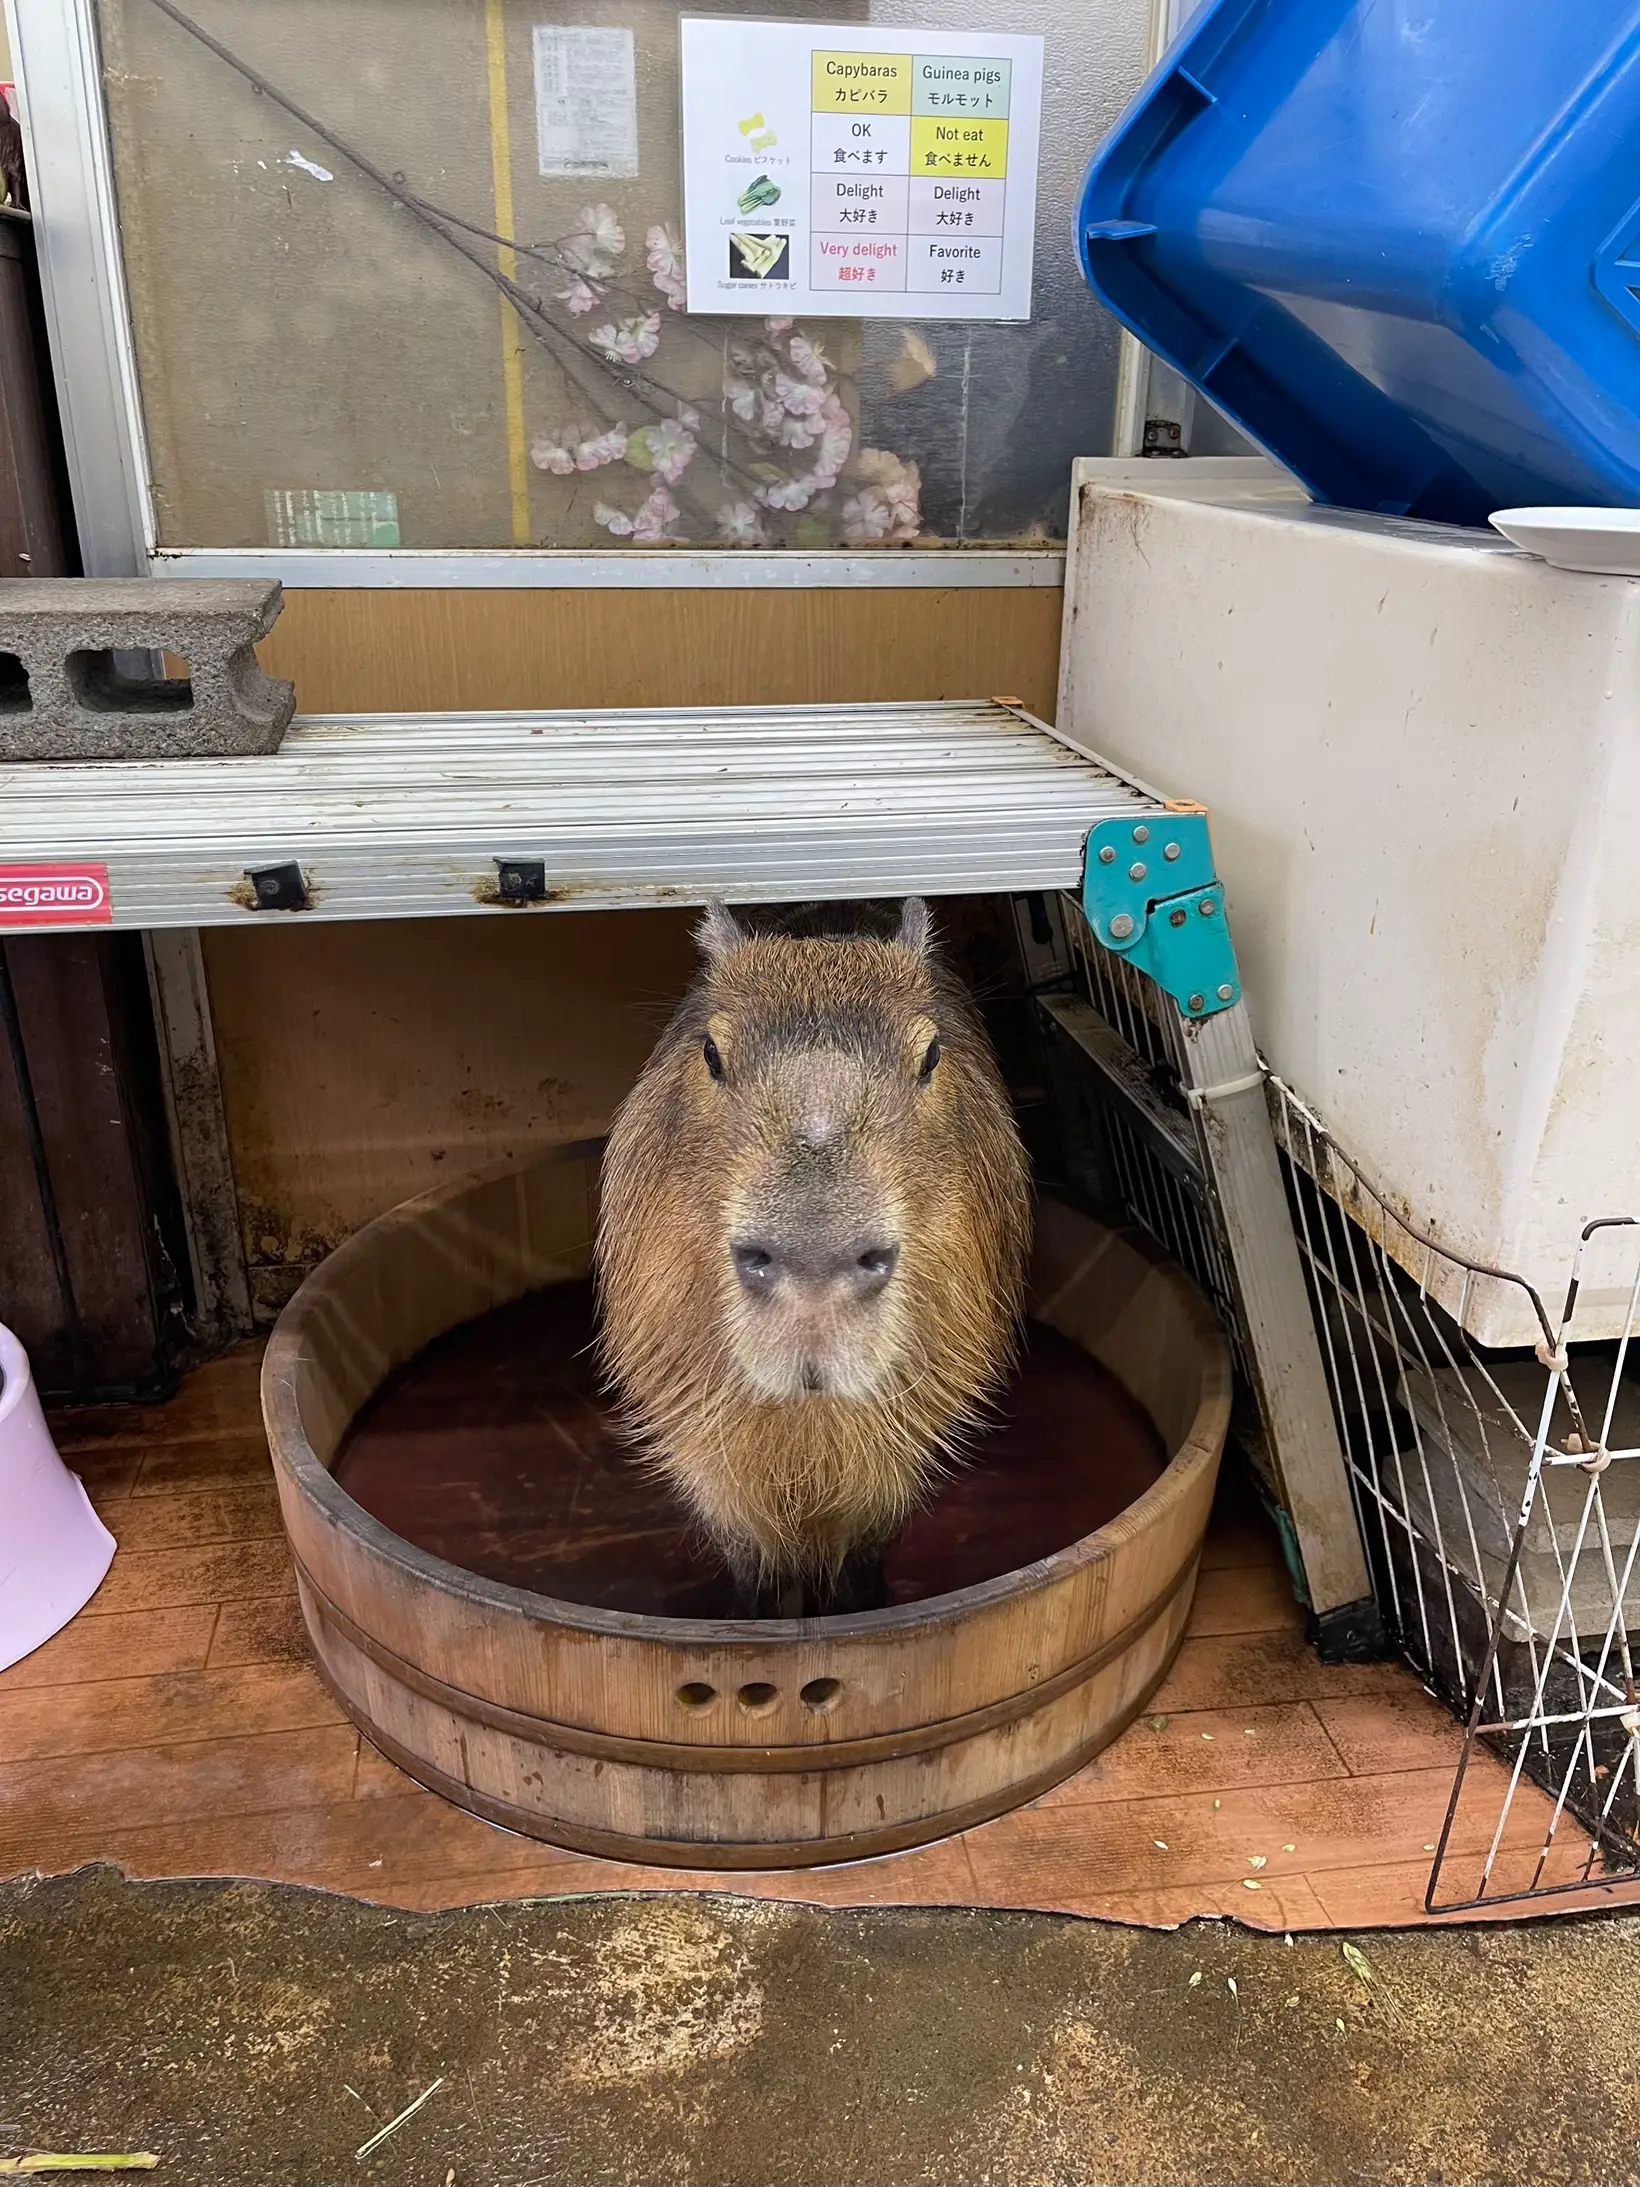 MUST-VISIT CAPYBARA LAND IN JAPAN!!! SO WORTH IT 💗, Gallery posted by ash